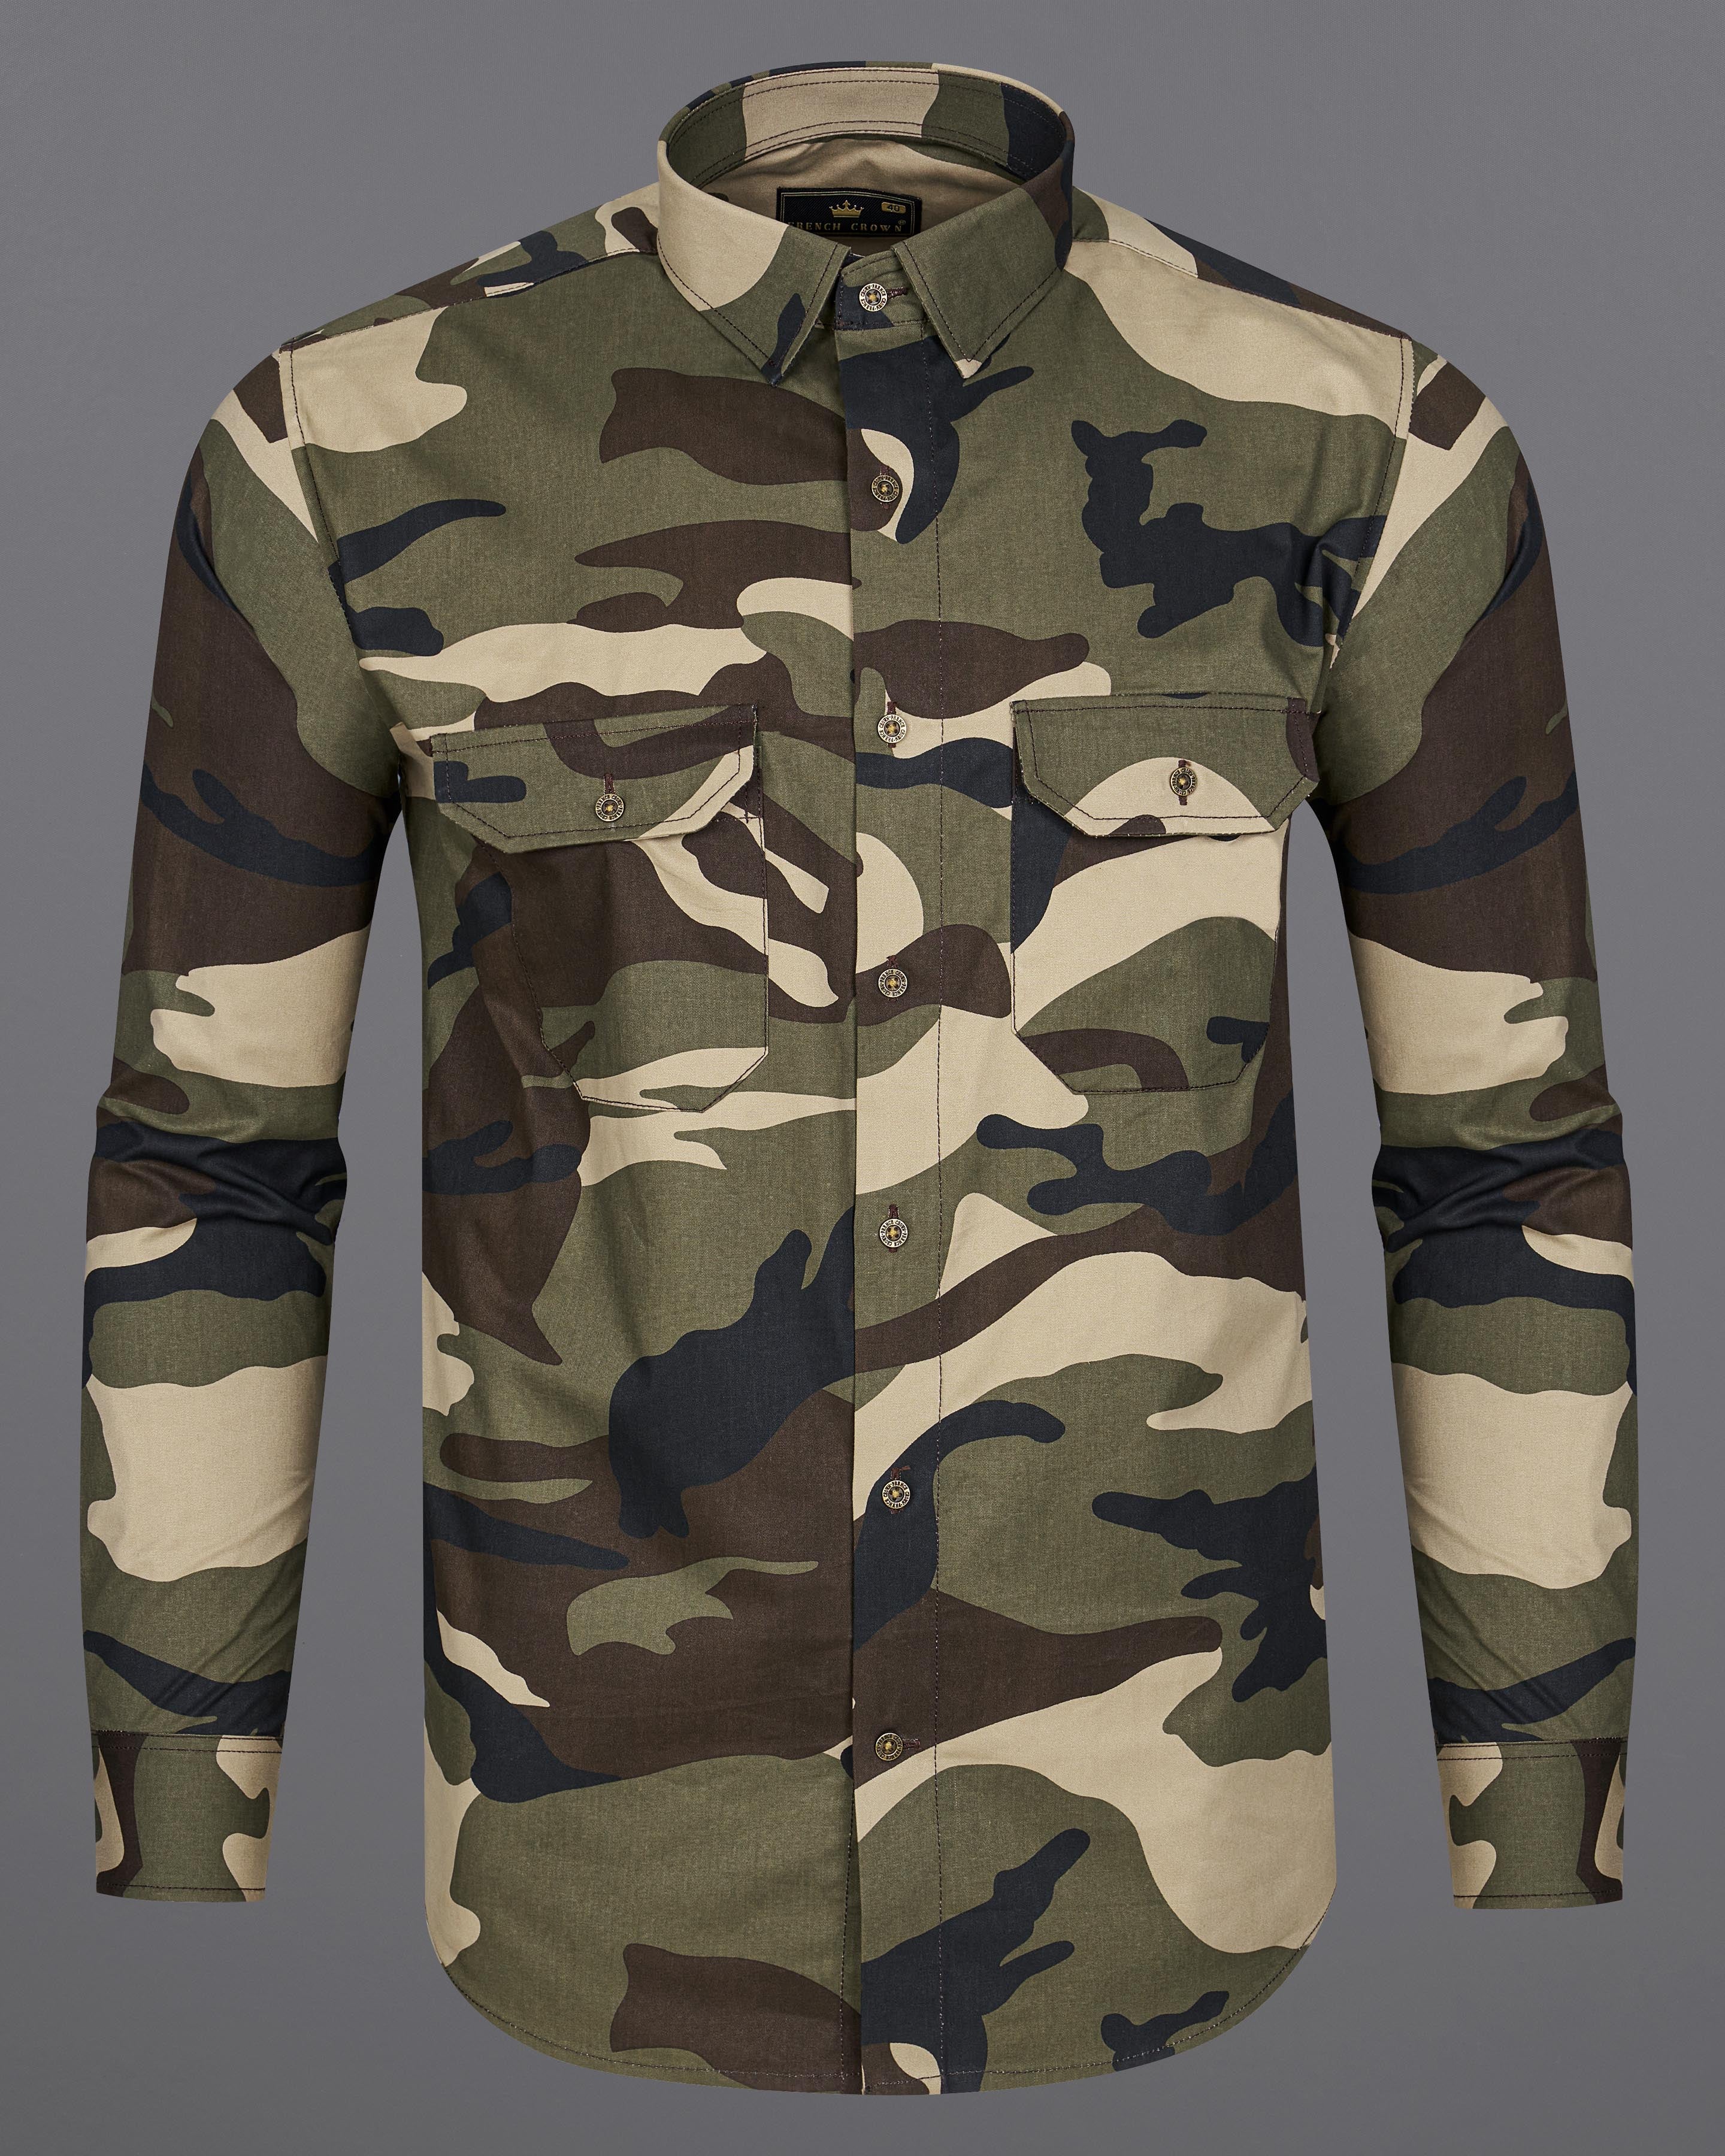 Finch Green with Wenge Brown Camouflage Printed Royal Oxford Designer Shirt 8927-MB-FP-38, 8927-MB-FP-H-38,  8927-MB-FP-39,  8927-MB-FP-H-39,  8927-MB-FP-40,  8927-MB-FP-H-40,  8927-MB-FP-42,  8927-MB-FP-H-42,  8927-MB-FP-44,  8927-MB-FP-H-44,  8927-MB-FP-46,  8927-MB-FP-H-46,  8927-MB-FP-48,  8927-MB-FP-H-48,  8927-MB-FP-50,  8927-MB-FP-H-50,  8927-MB-FP-52,  8927-MB-FP-H-52